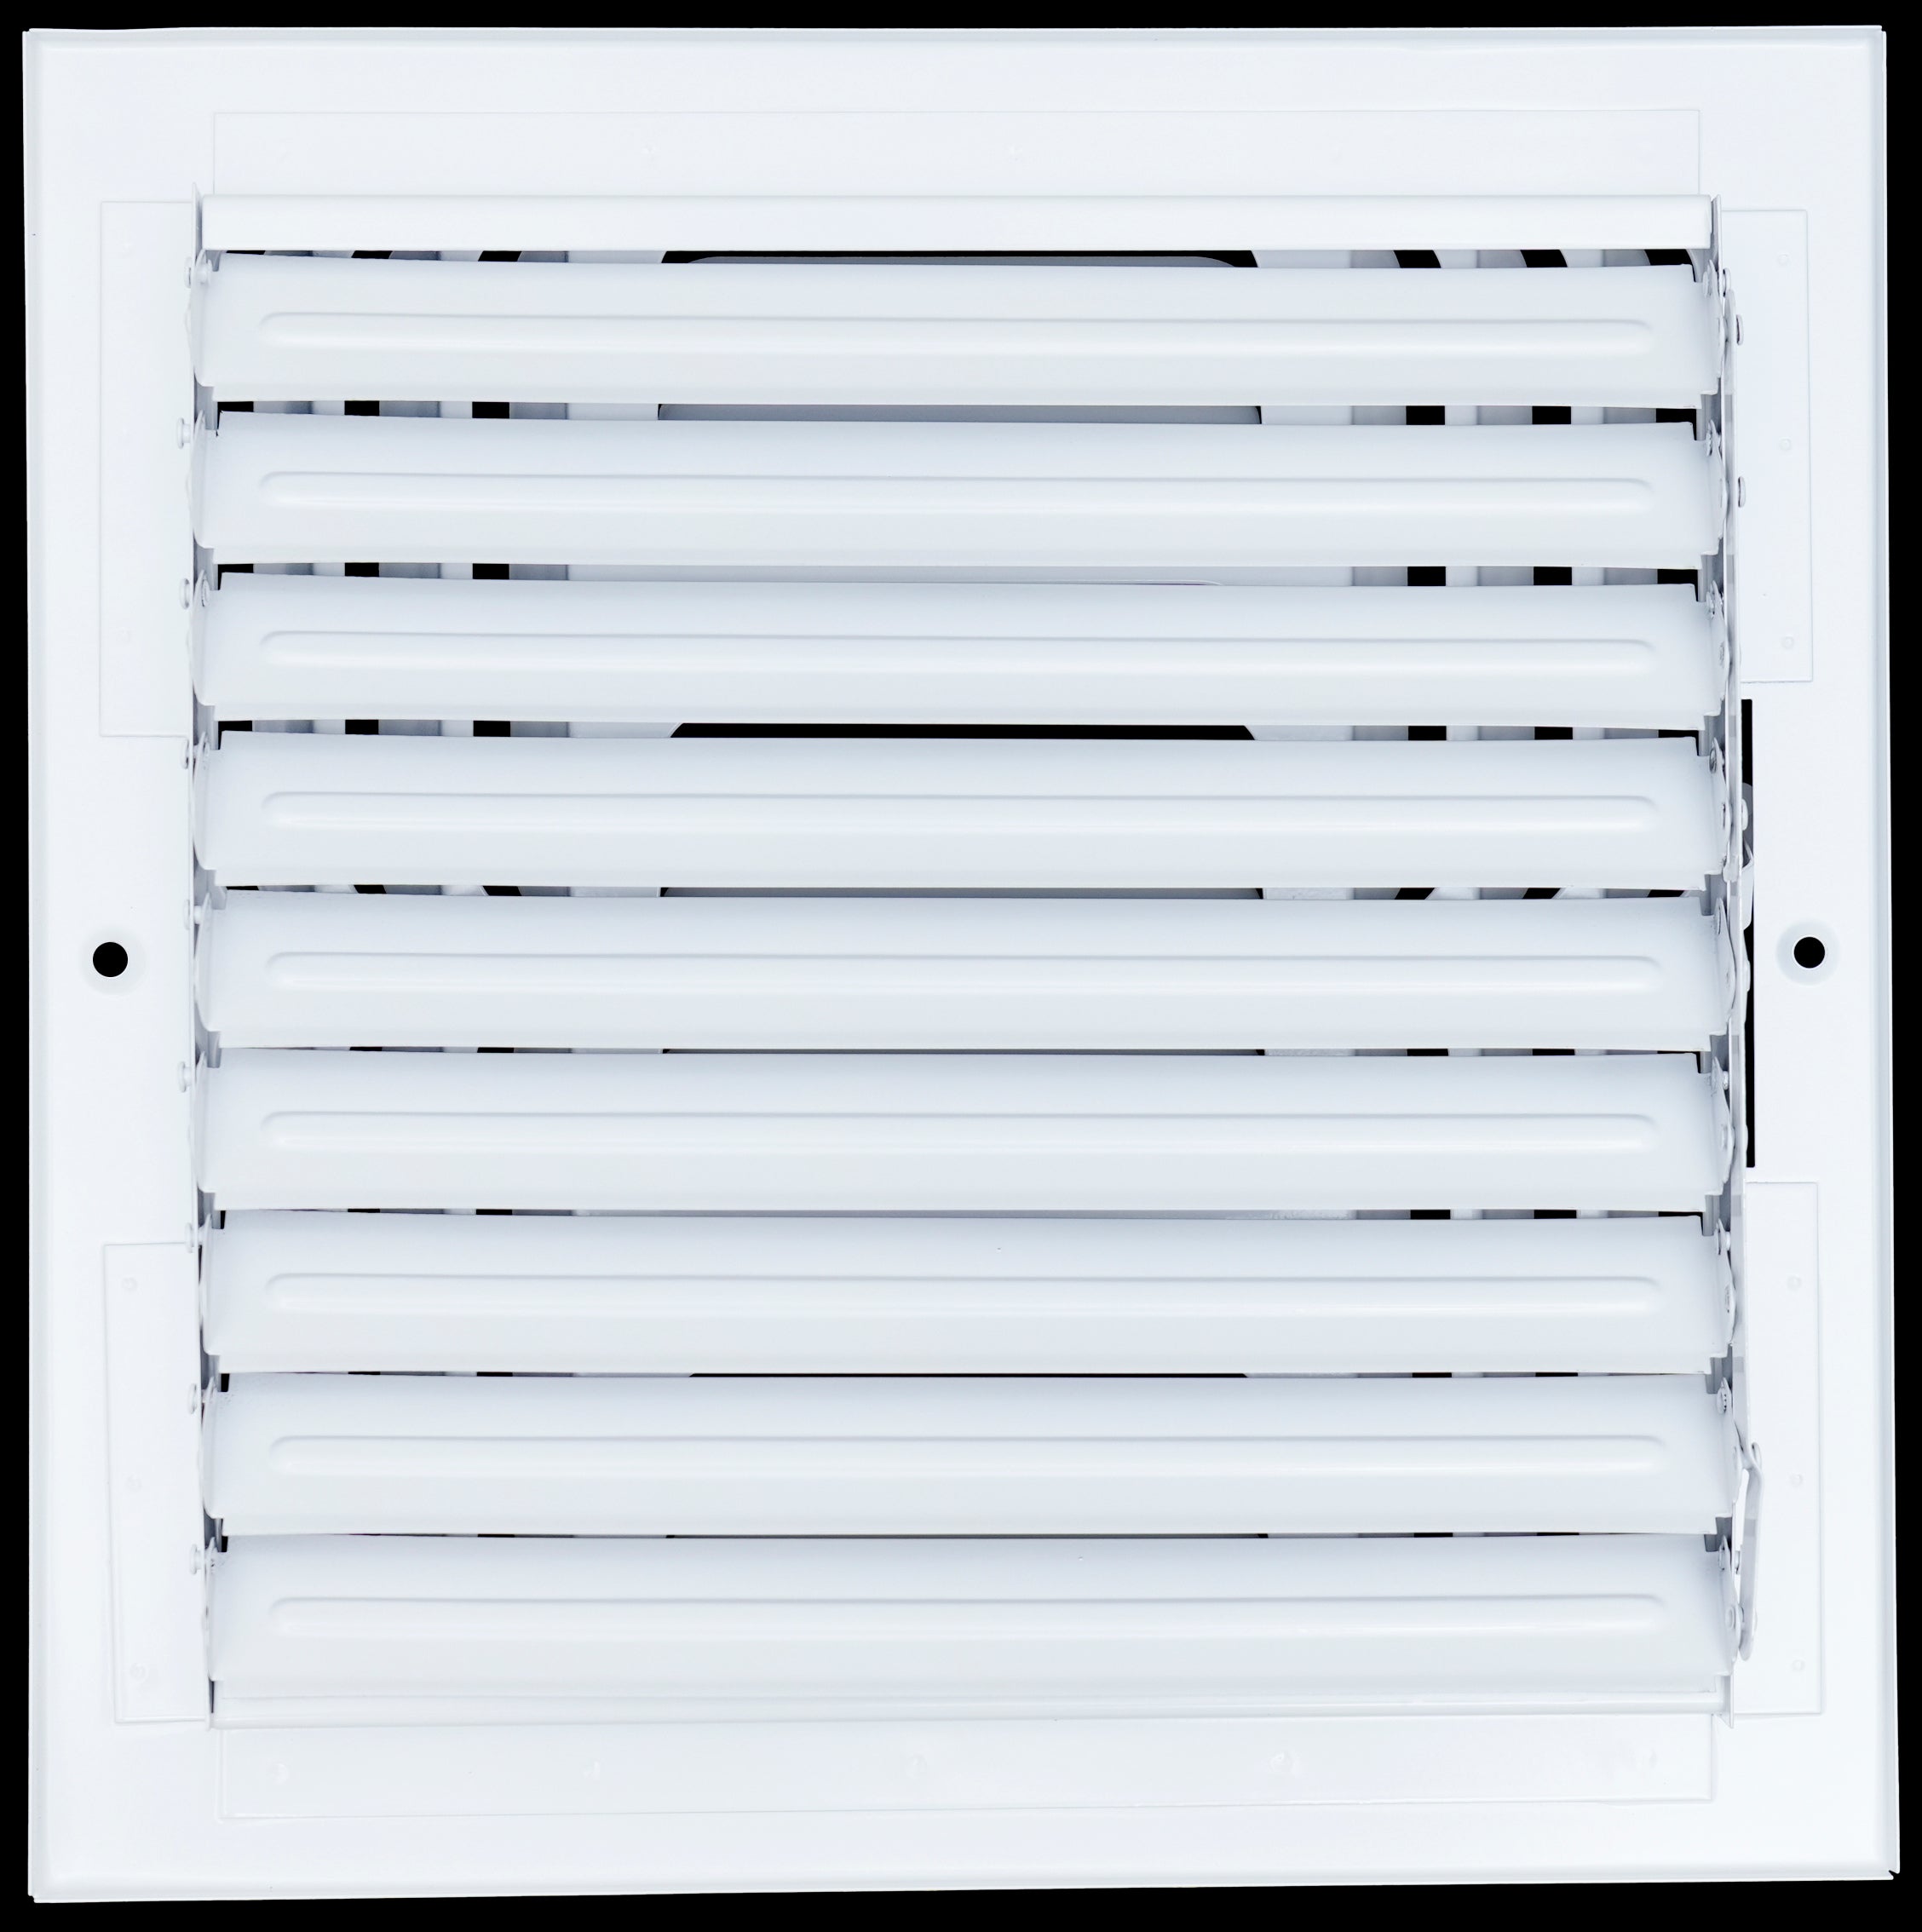 10"W x 10"H 3 WAY Fixed Curved Blade Air Supply Diffuser | Register Vent Cover Grill for Sidewall and Ceiling | White | Outer Dimensions: 11.75"W X 11.75"H